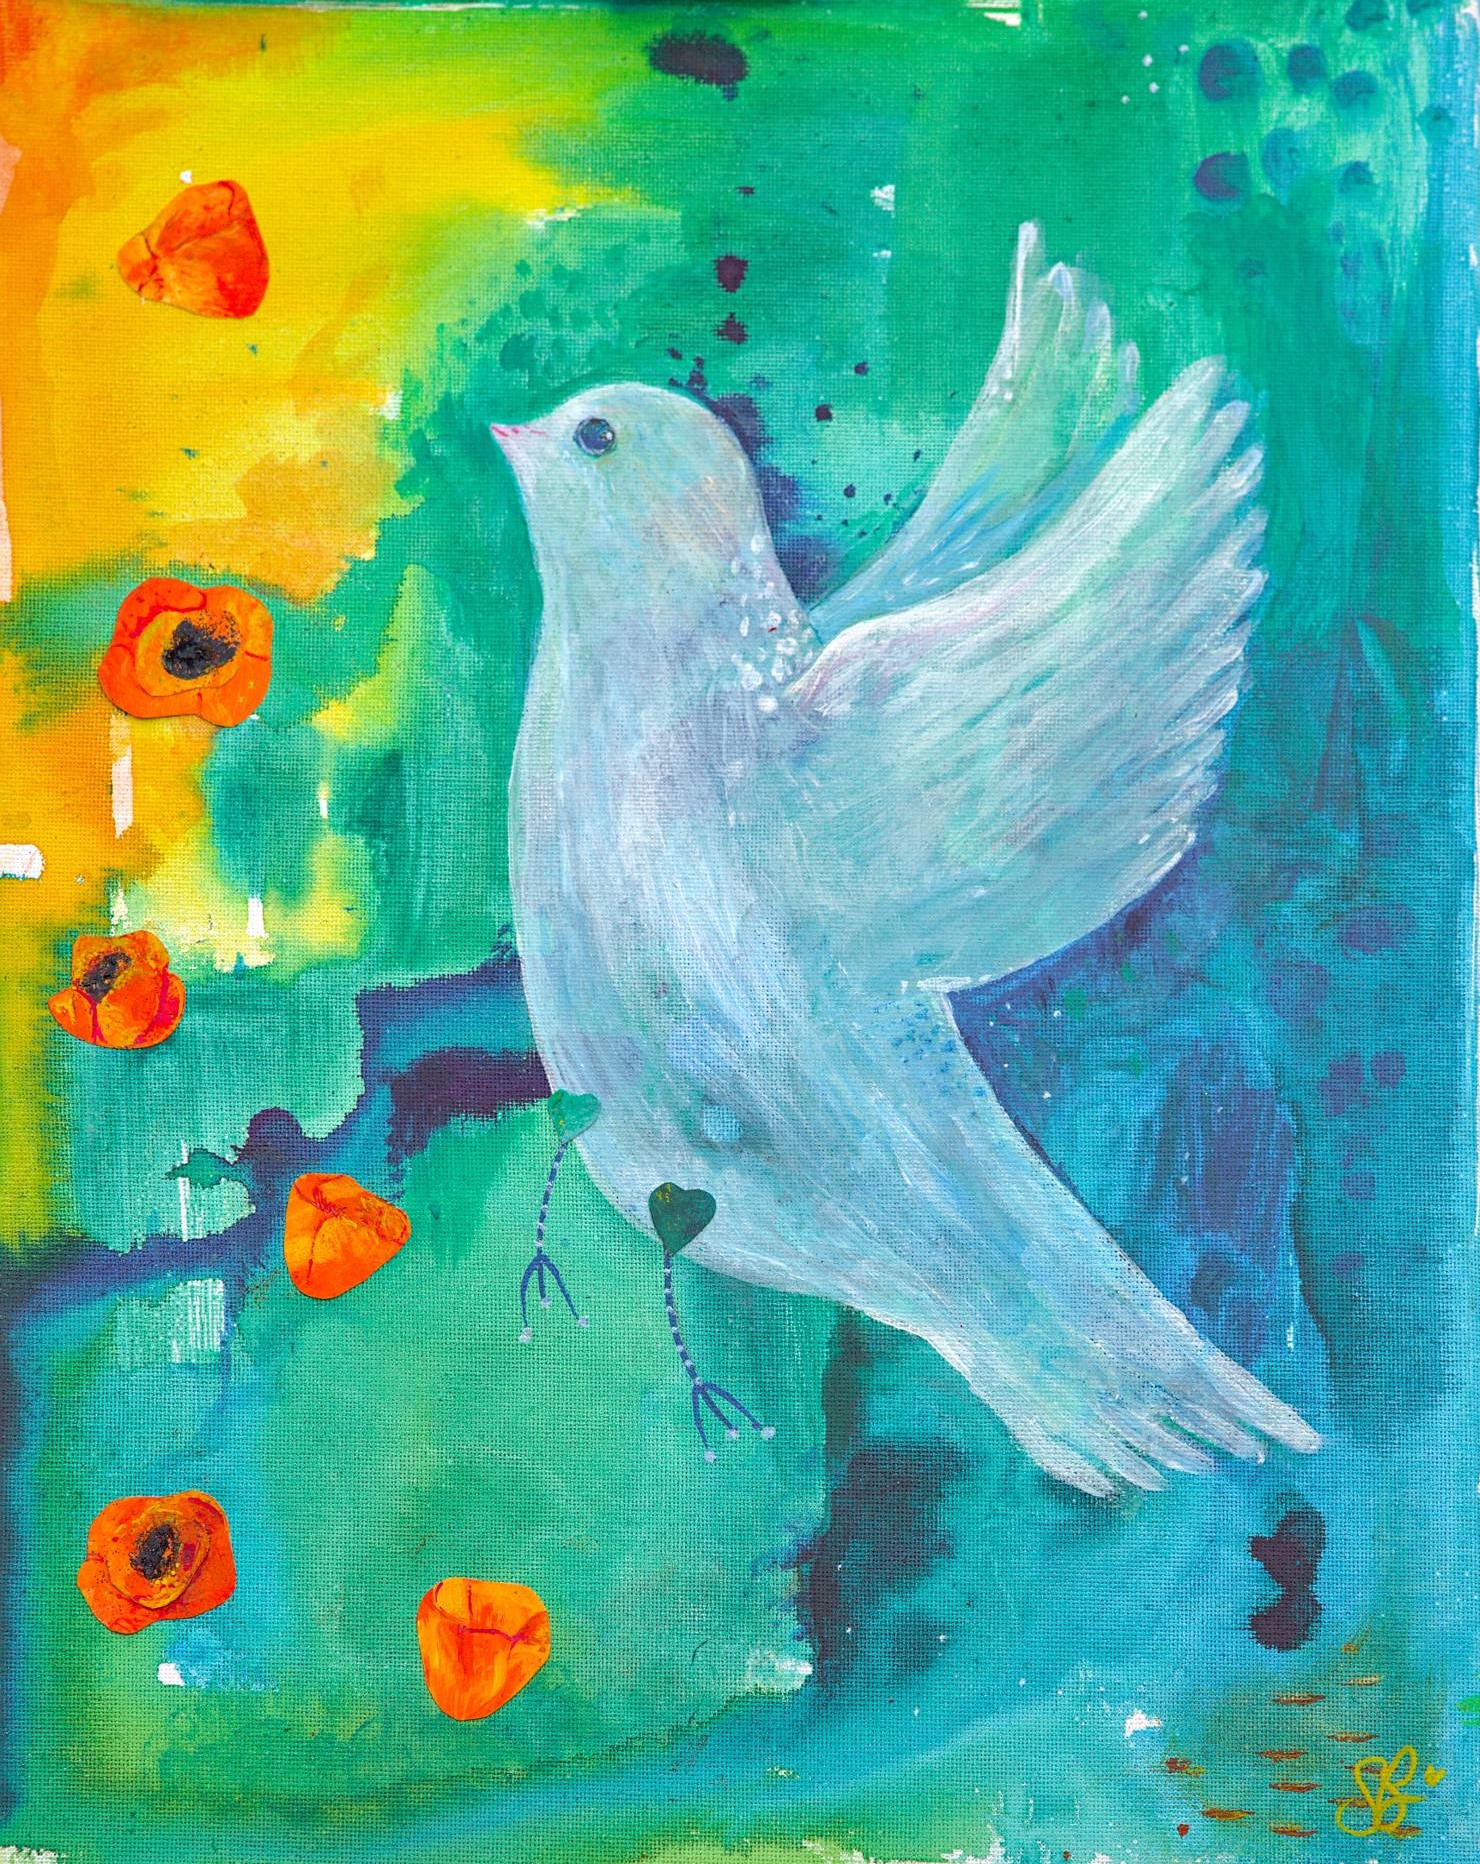 Beautiful dove painting - dove rises above her abstract land of teals, greens and yellows. Orange poppies symbolising peace scatter beside her.